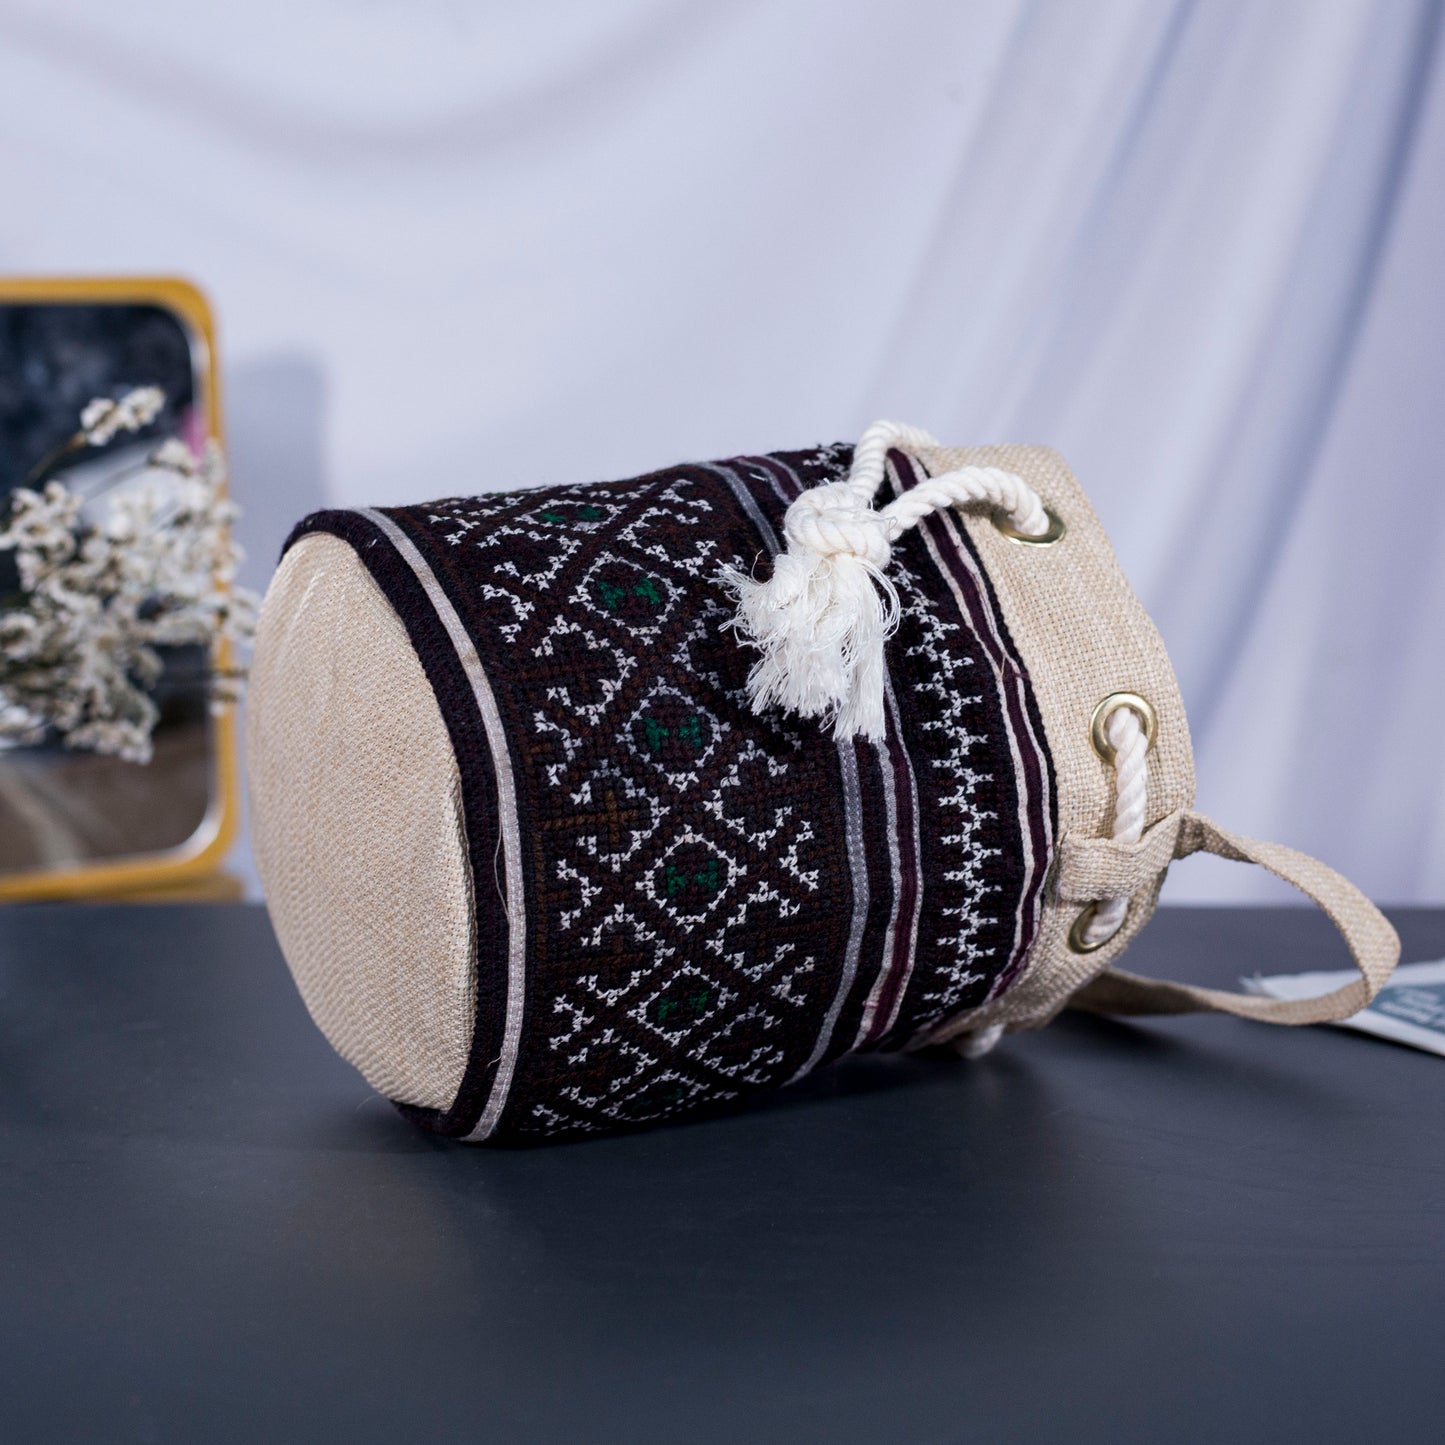 Mini cosmetic bag, brown embroidery, string to use as cross-shoulder bag